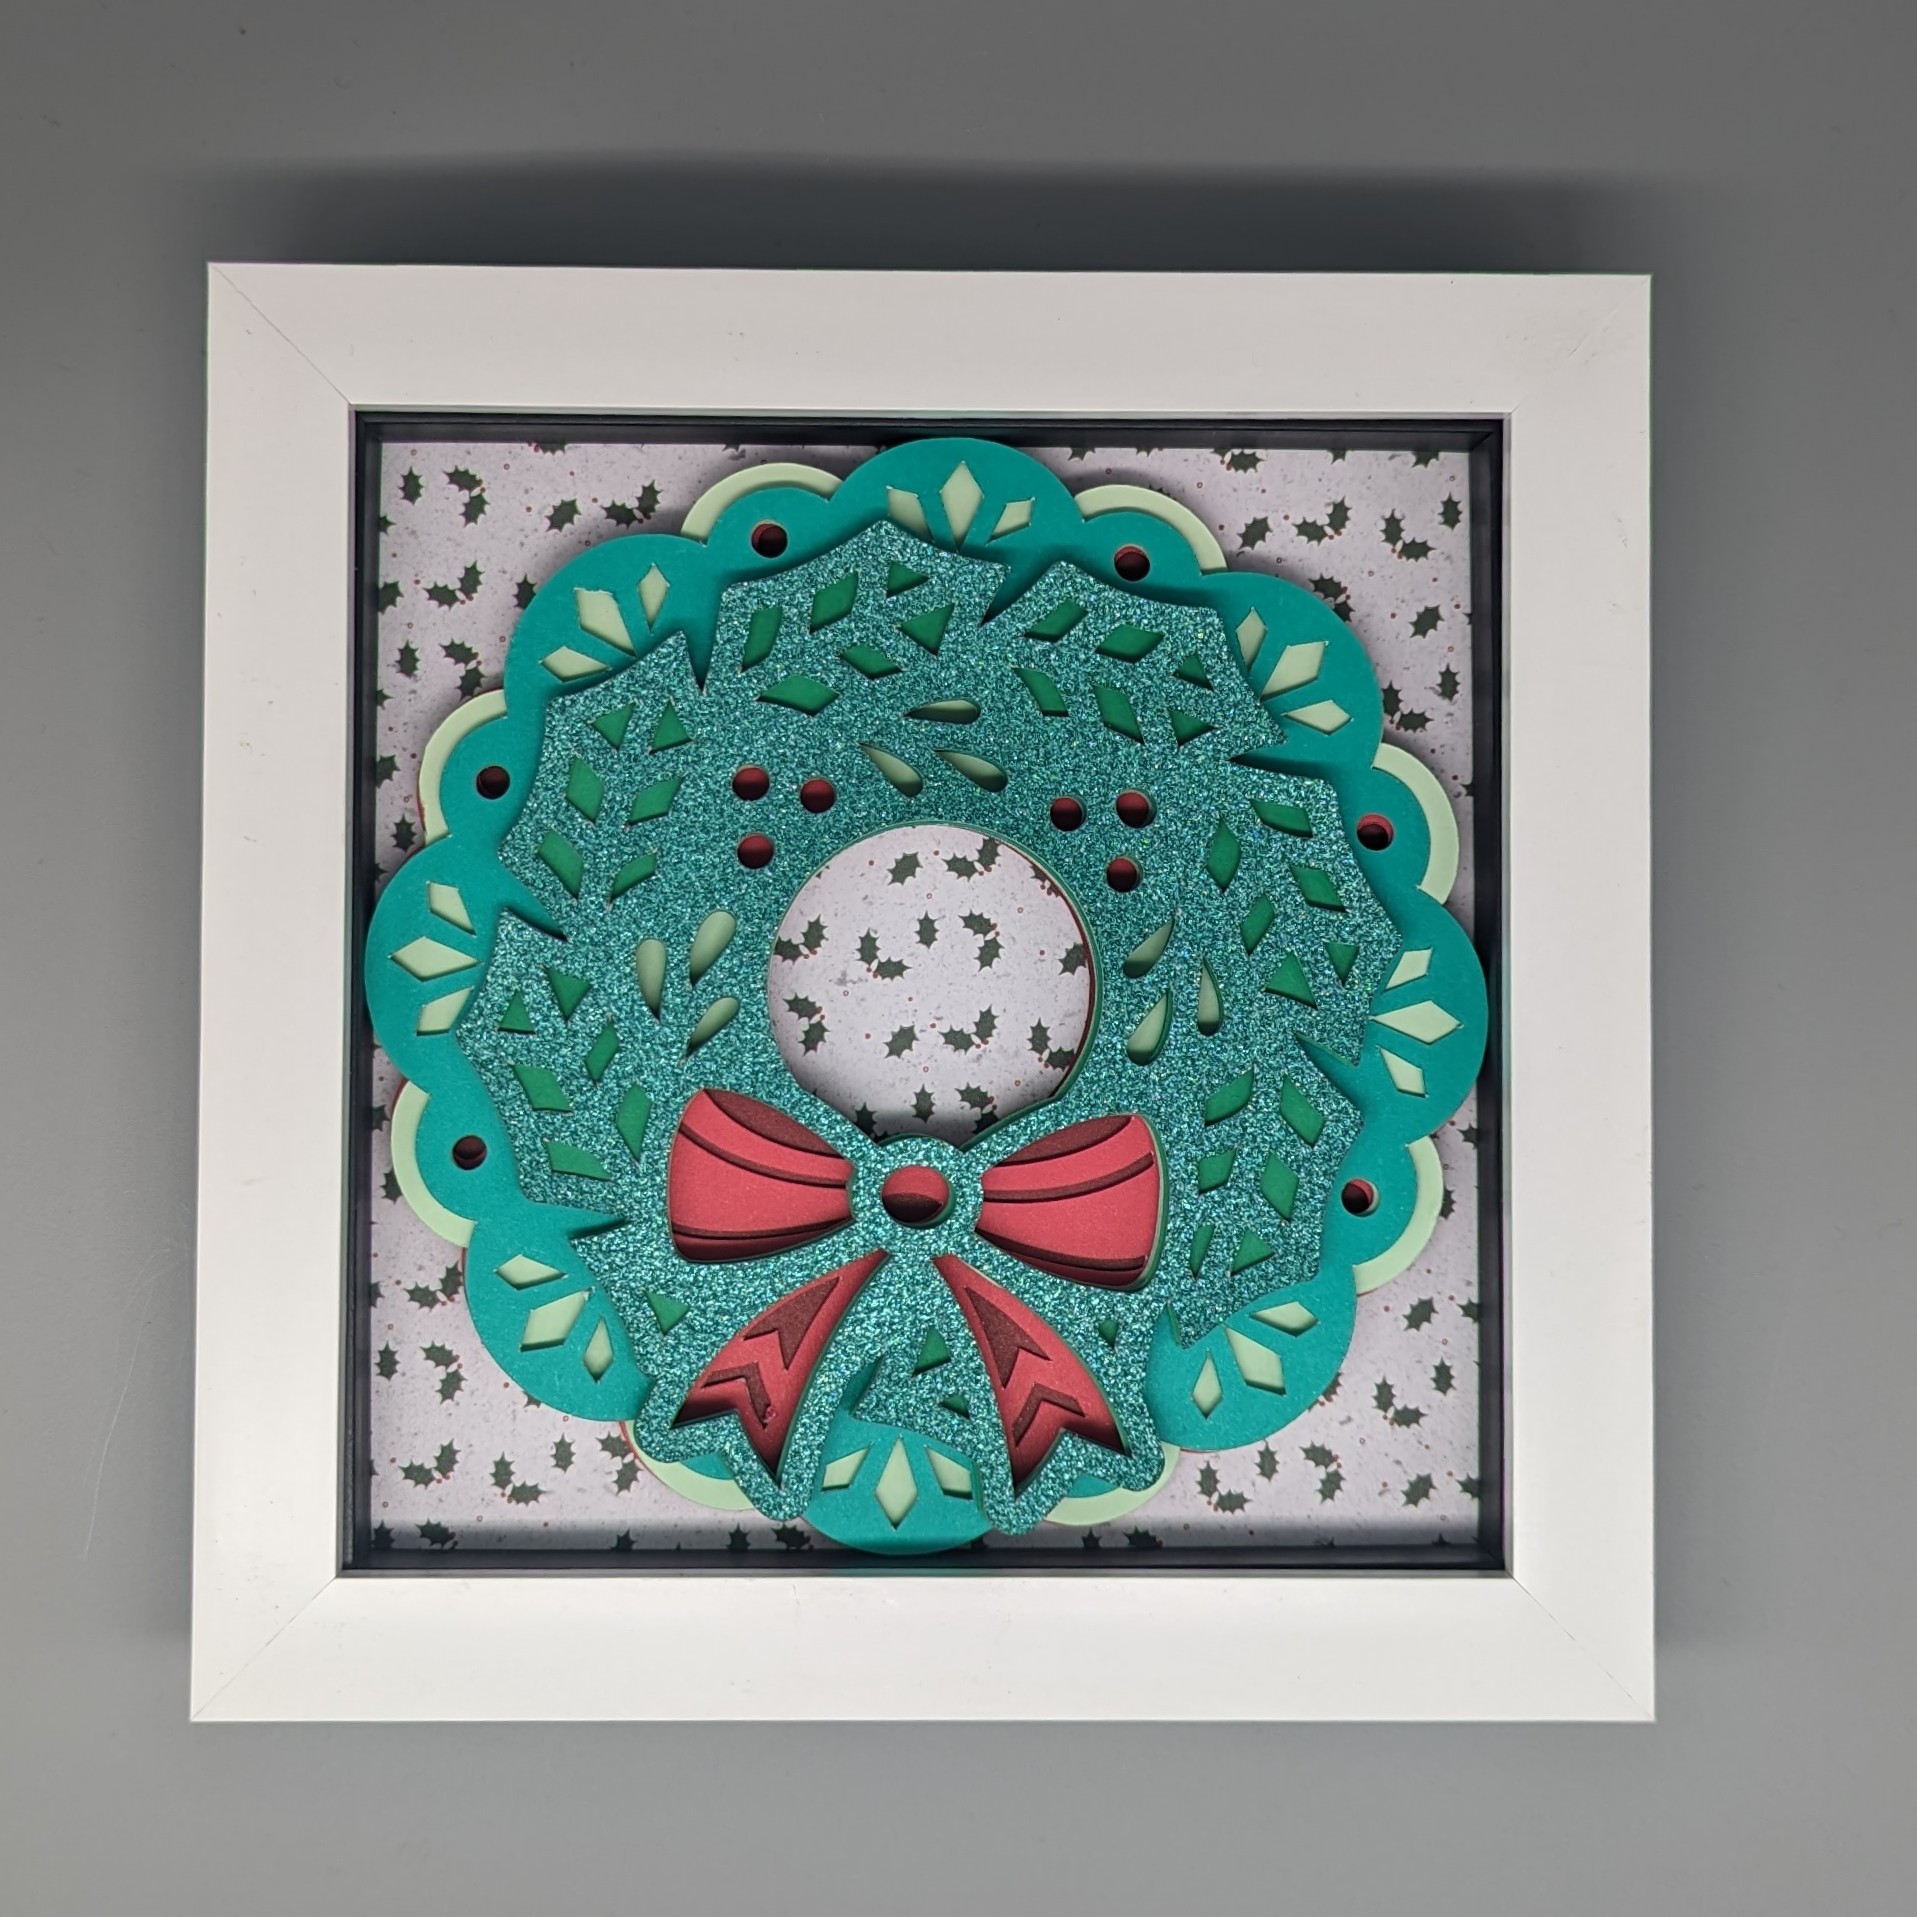 Featured image for “Christmas Layered Wreath - Framed”